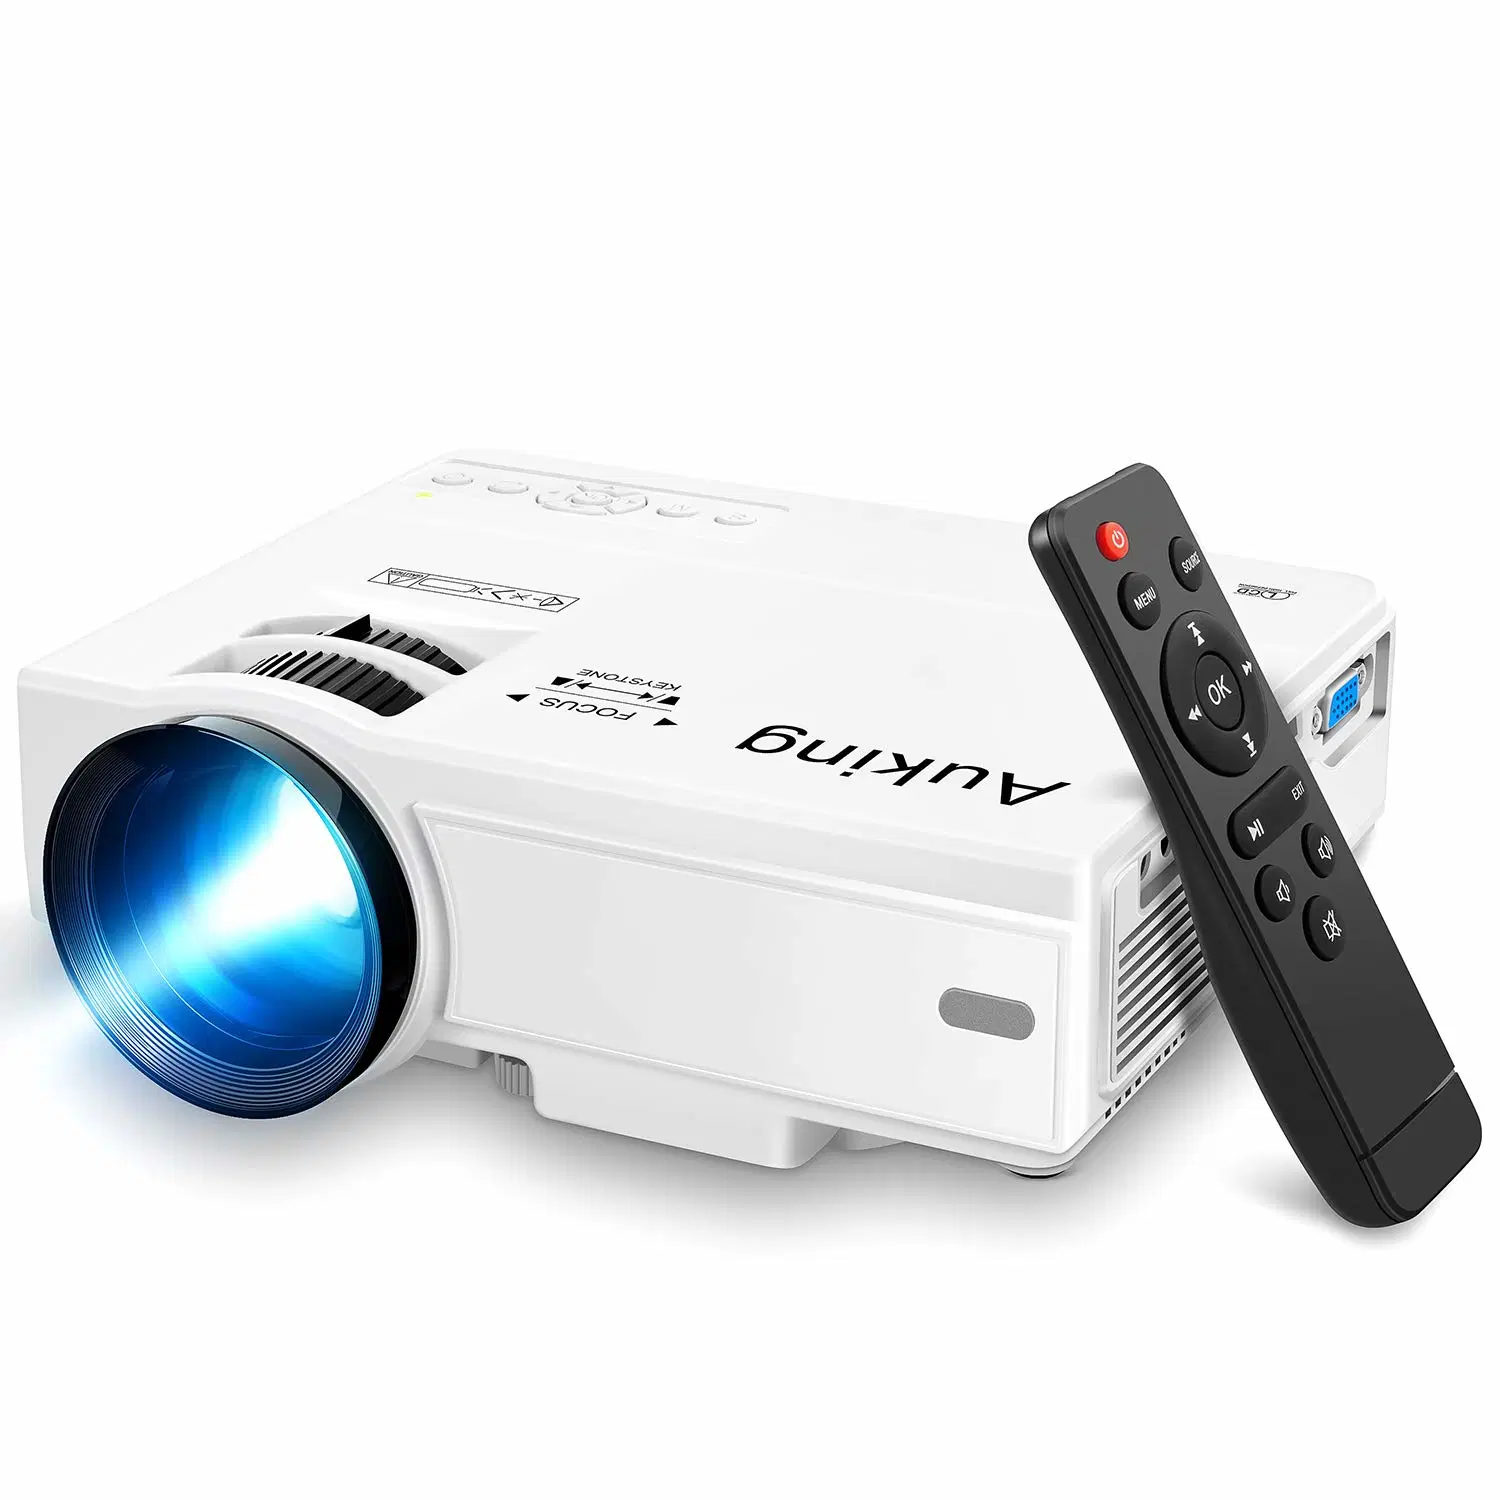 Auking Projector, 2023 Upgraded Mini Projector, 9500 Lumens Multimedia Home Theater Video Projector, Compatible with Full HD 1080P HDMI, USB, VGA, AV, Smartphon